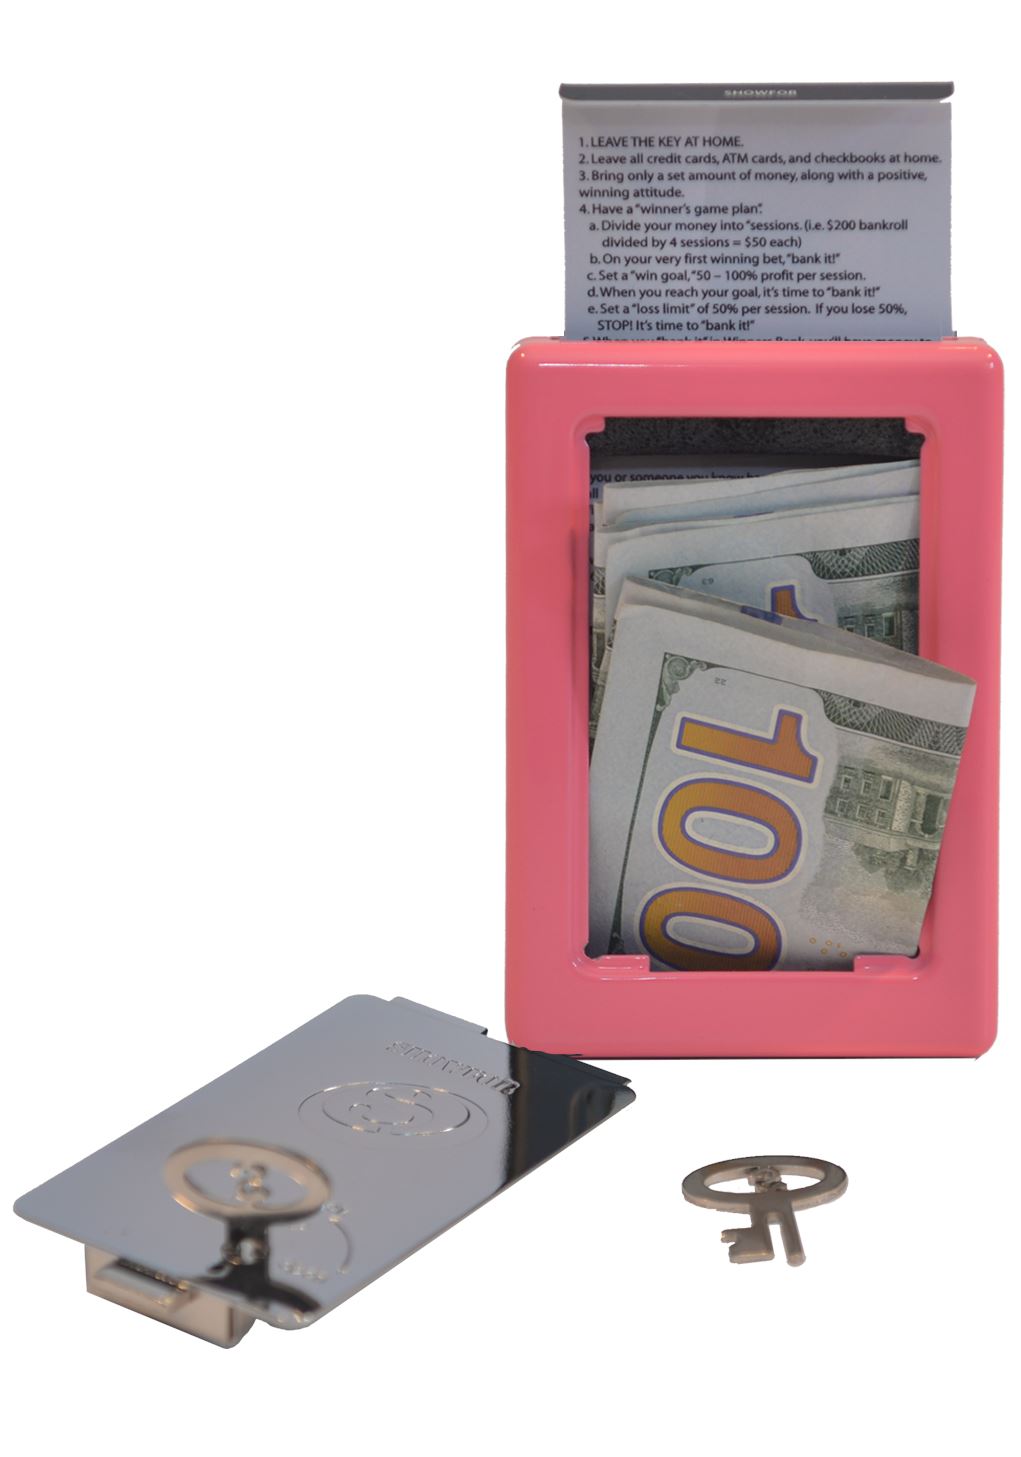 Showfor Winners Bank, Pink, Pocket-sized bank perfect for Blackjack Players, Slot Players, and all gambling and betting.